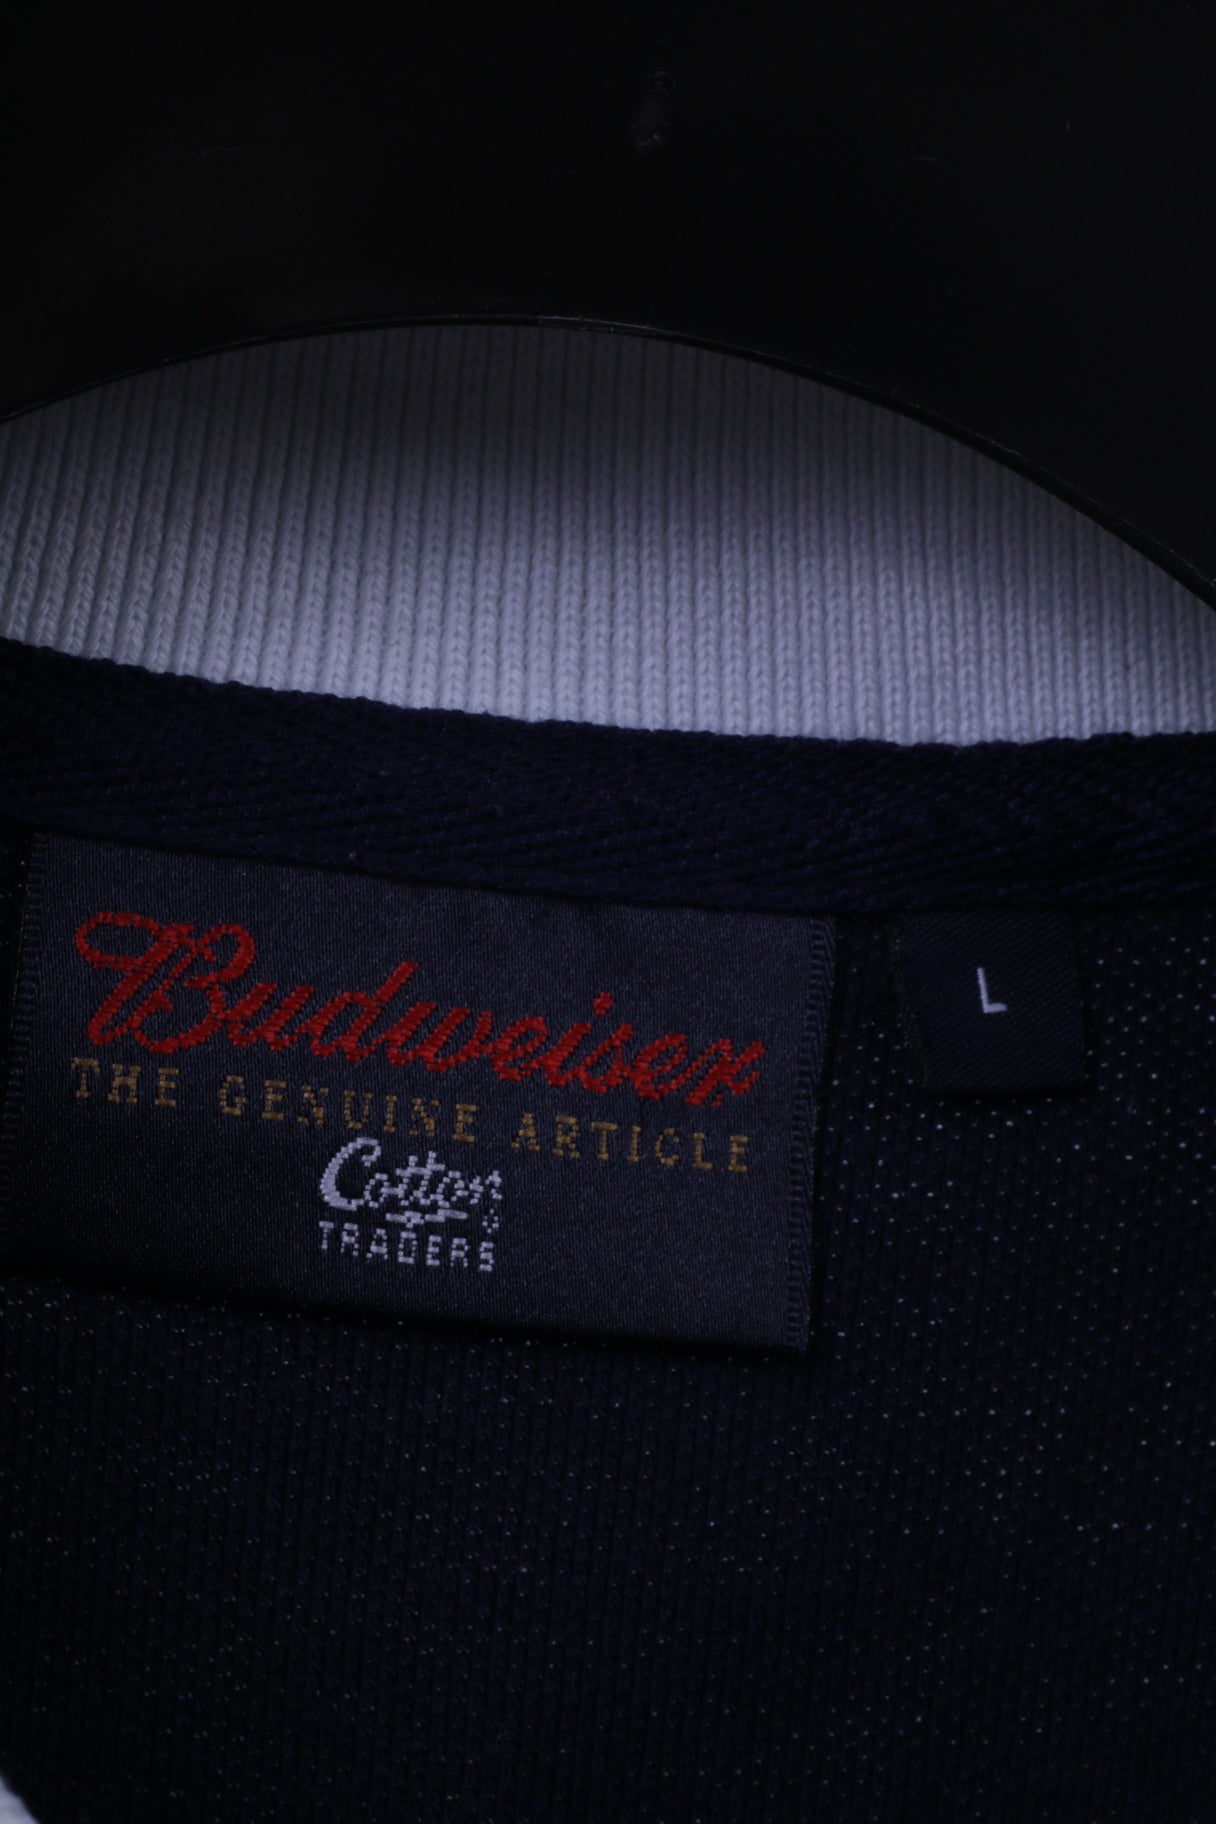 Cotton Traders Mens L Polo Shirt Budweiser Bud Gold Navy Cotton Top